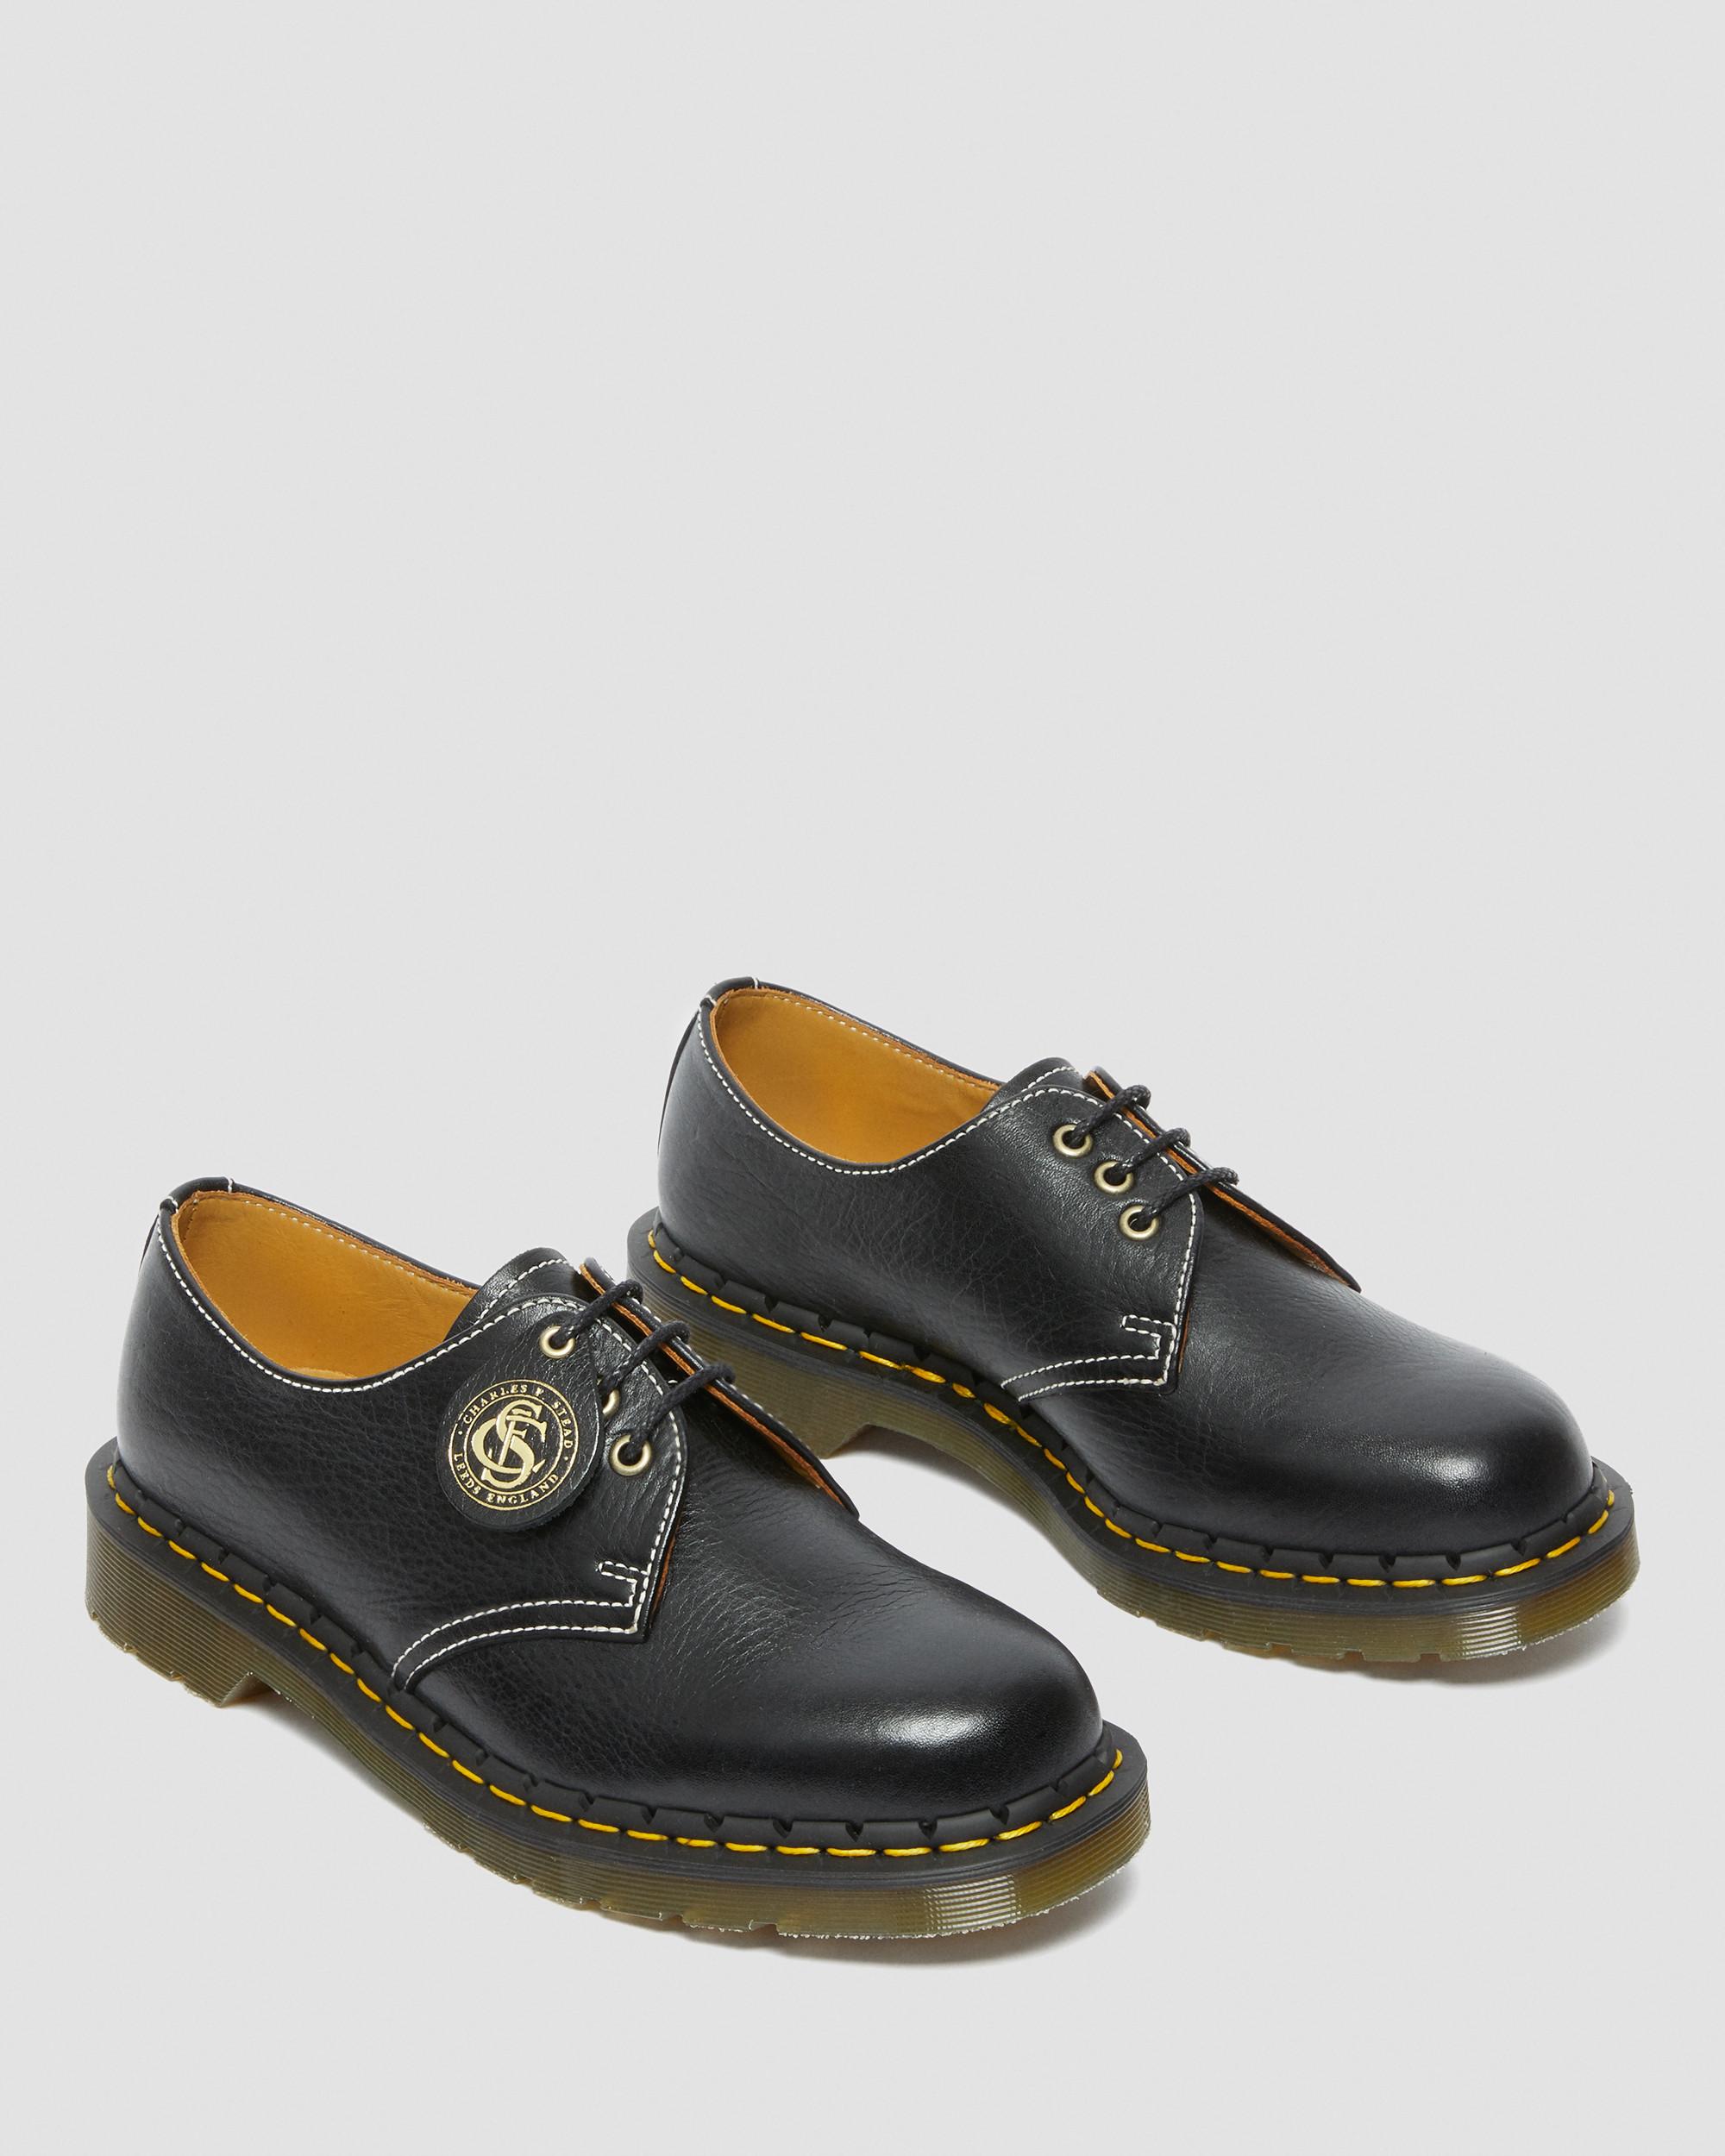 DR MARTENS 1461 Made in England Classic Leather Oxford Shoes